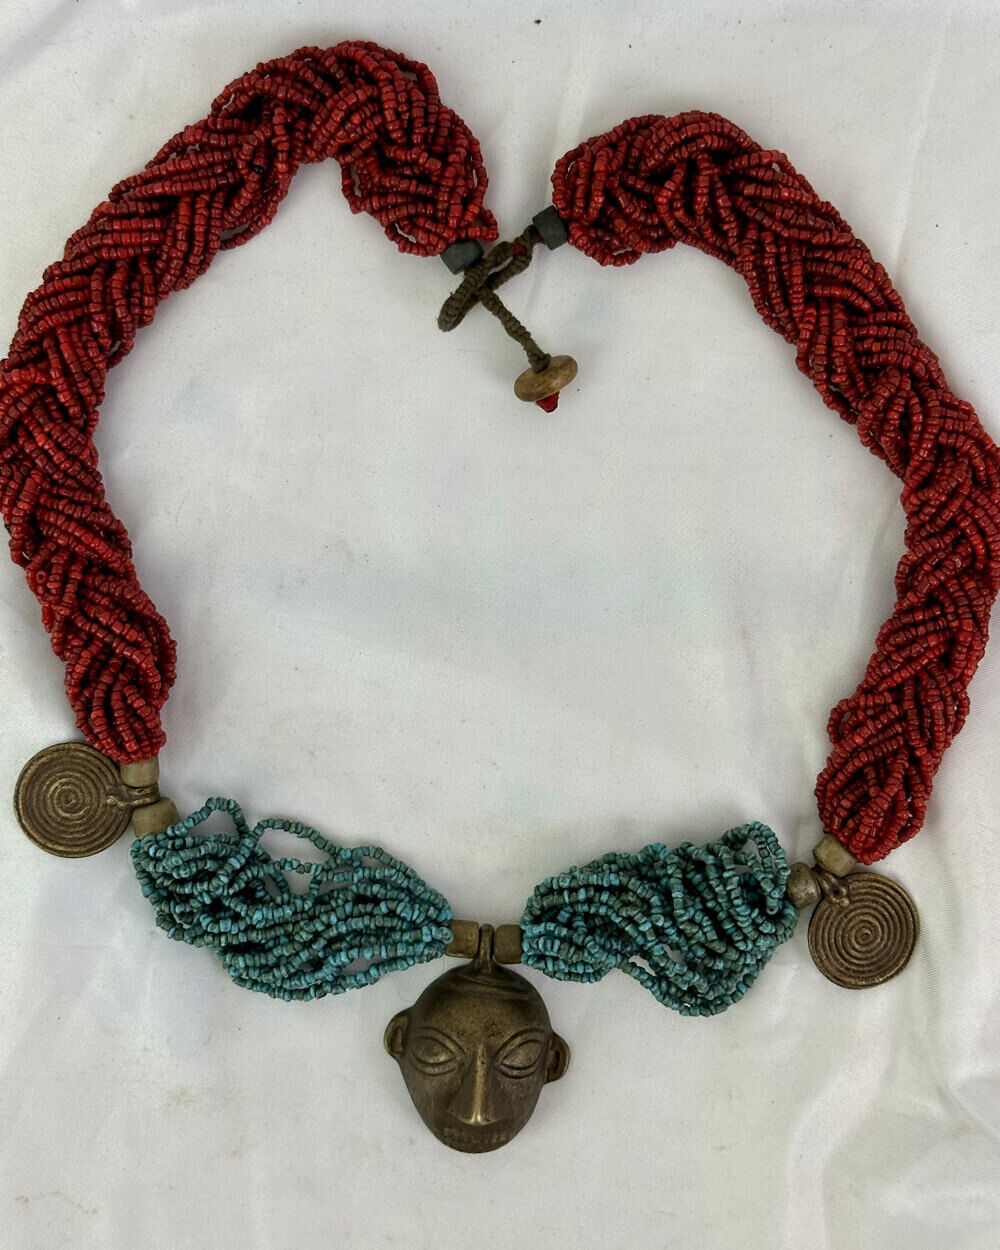 A Very Unique, One-of-a-Kind Chief’s Turquoise, Coral, Brass Necklace